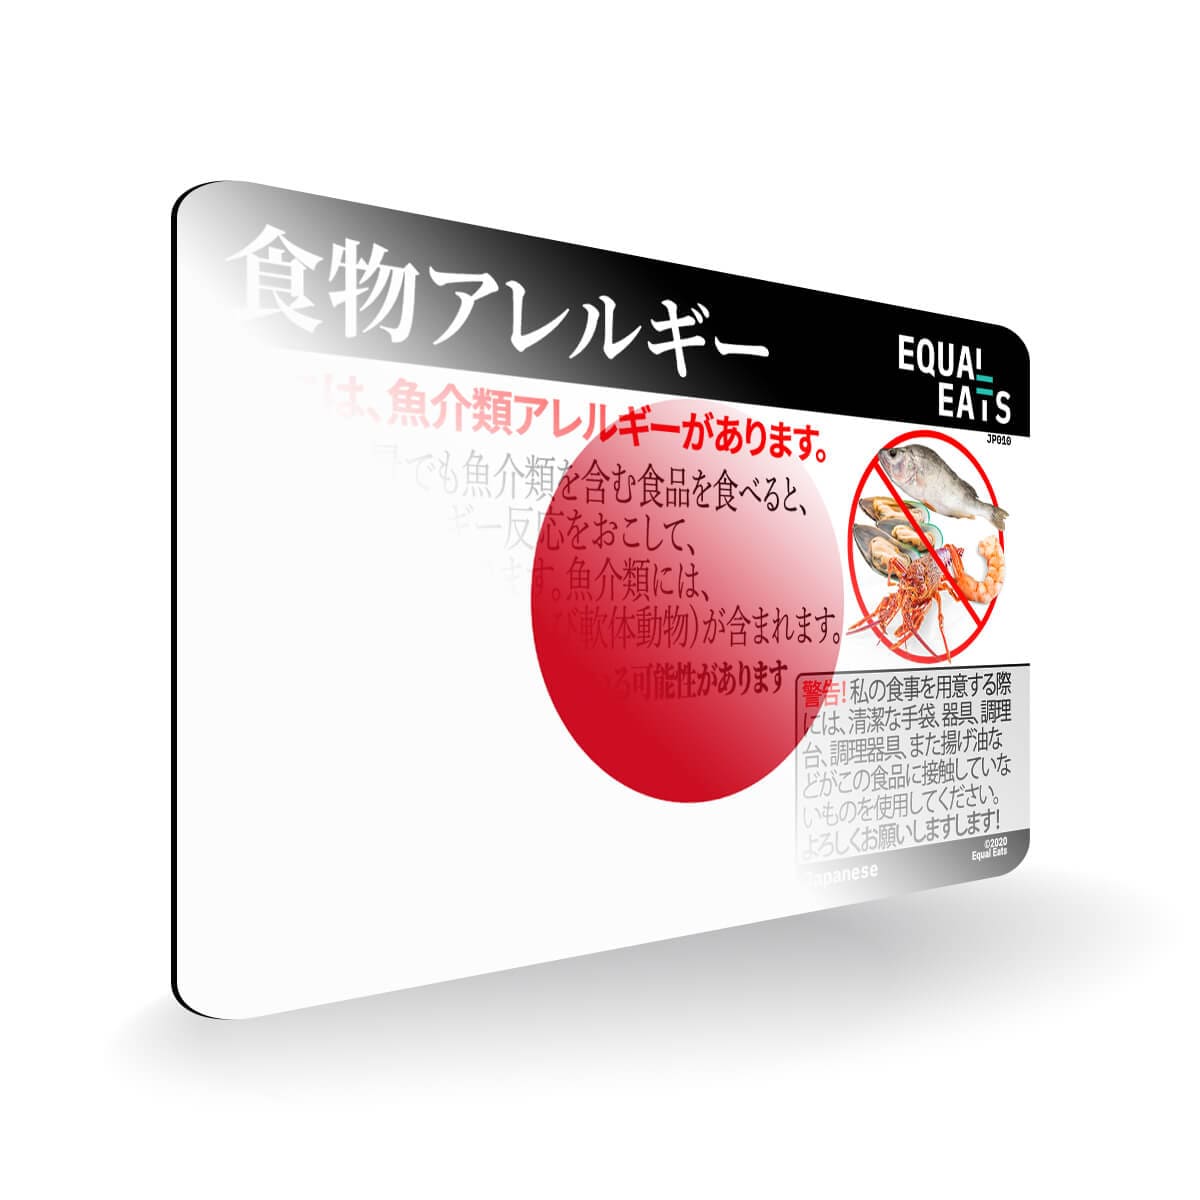 Seafood Allergy in Japanese. Seafood Allergy Card for Japan